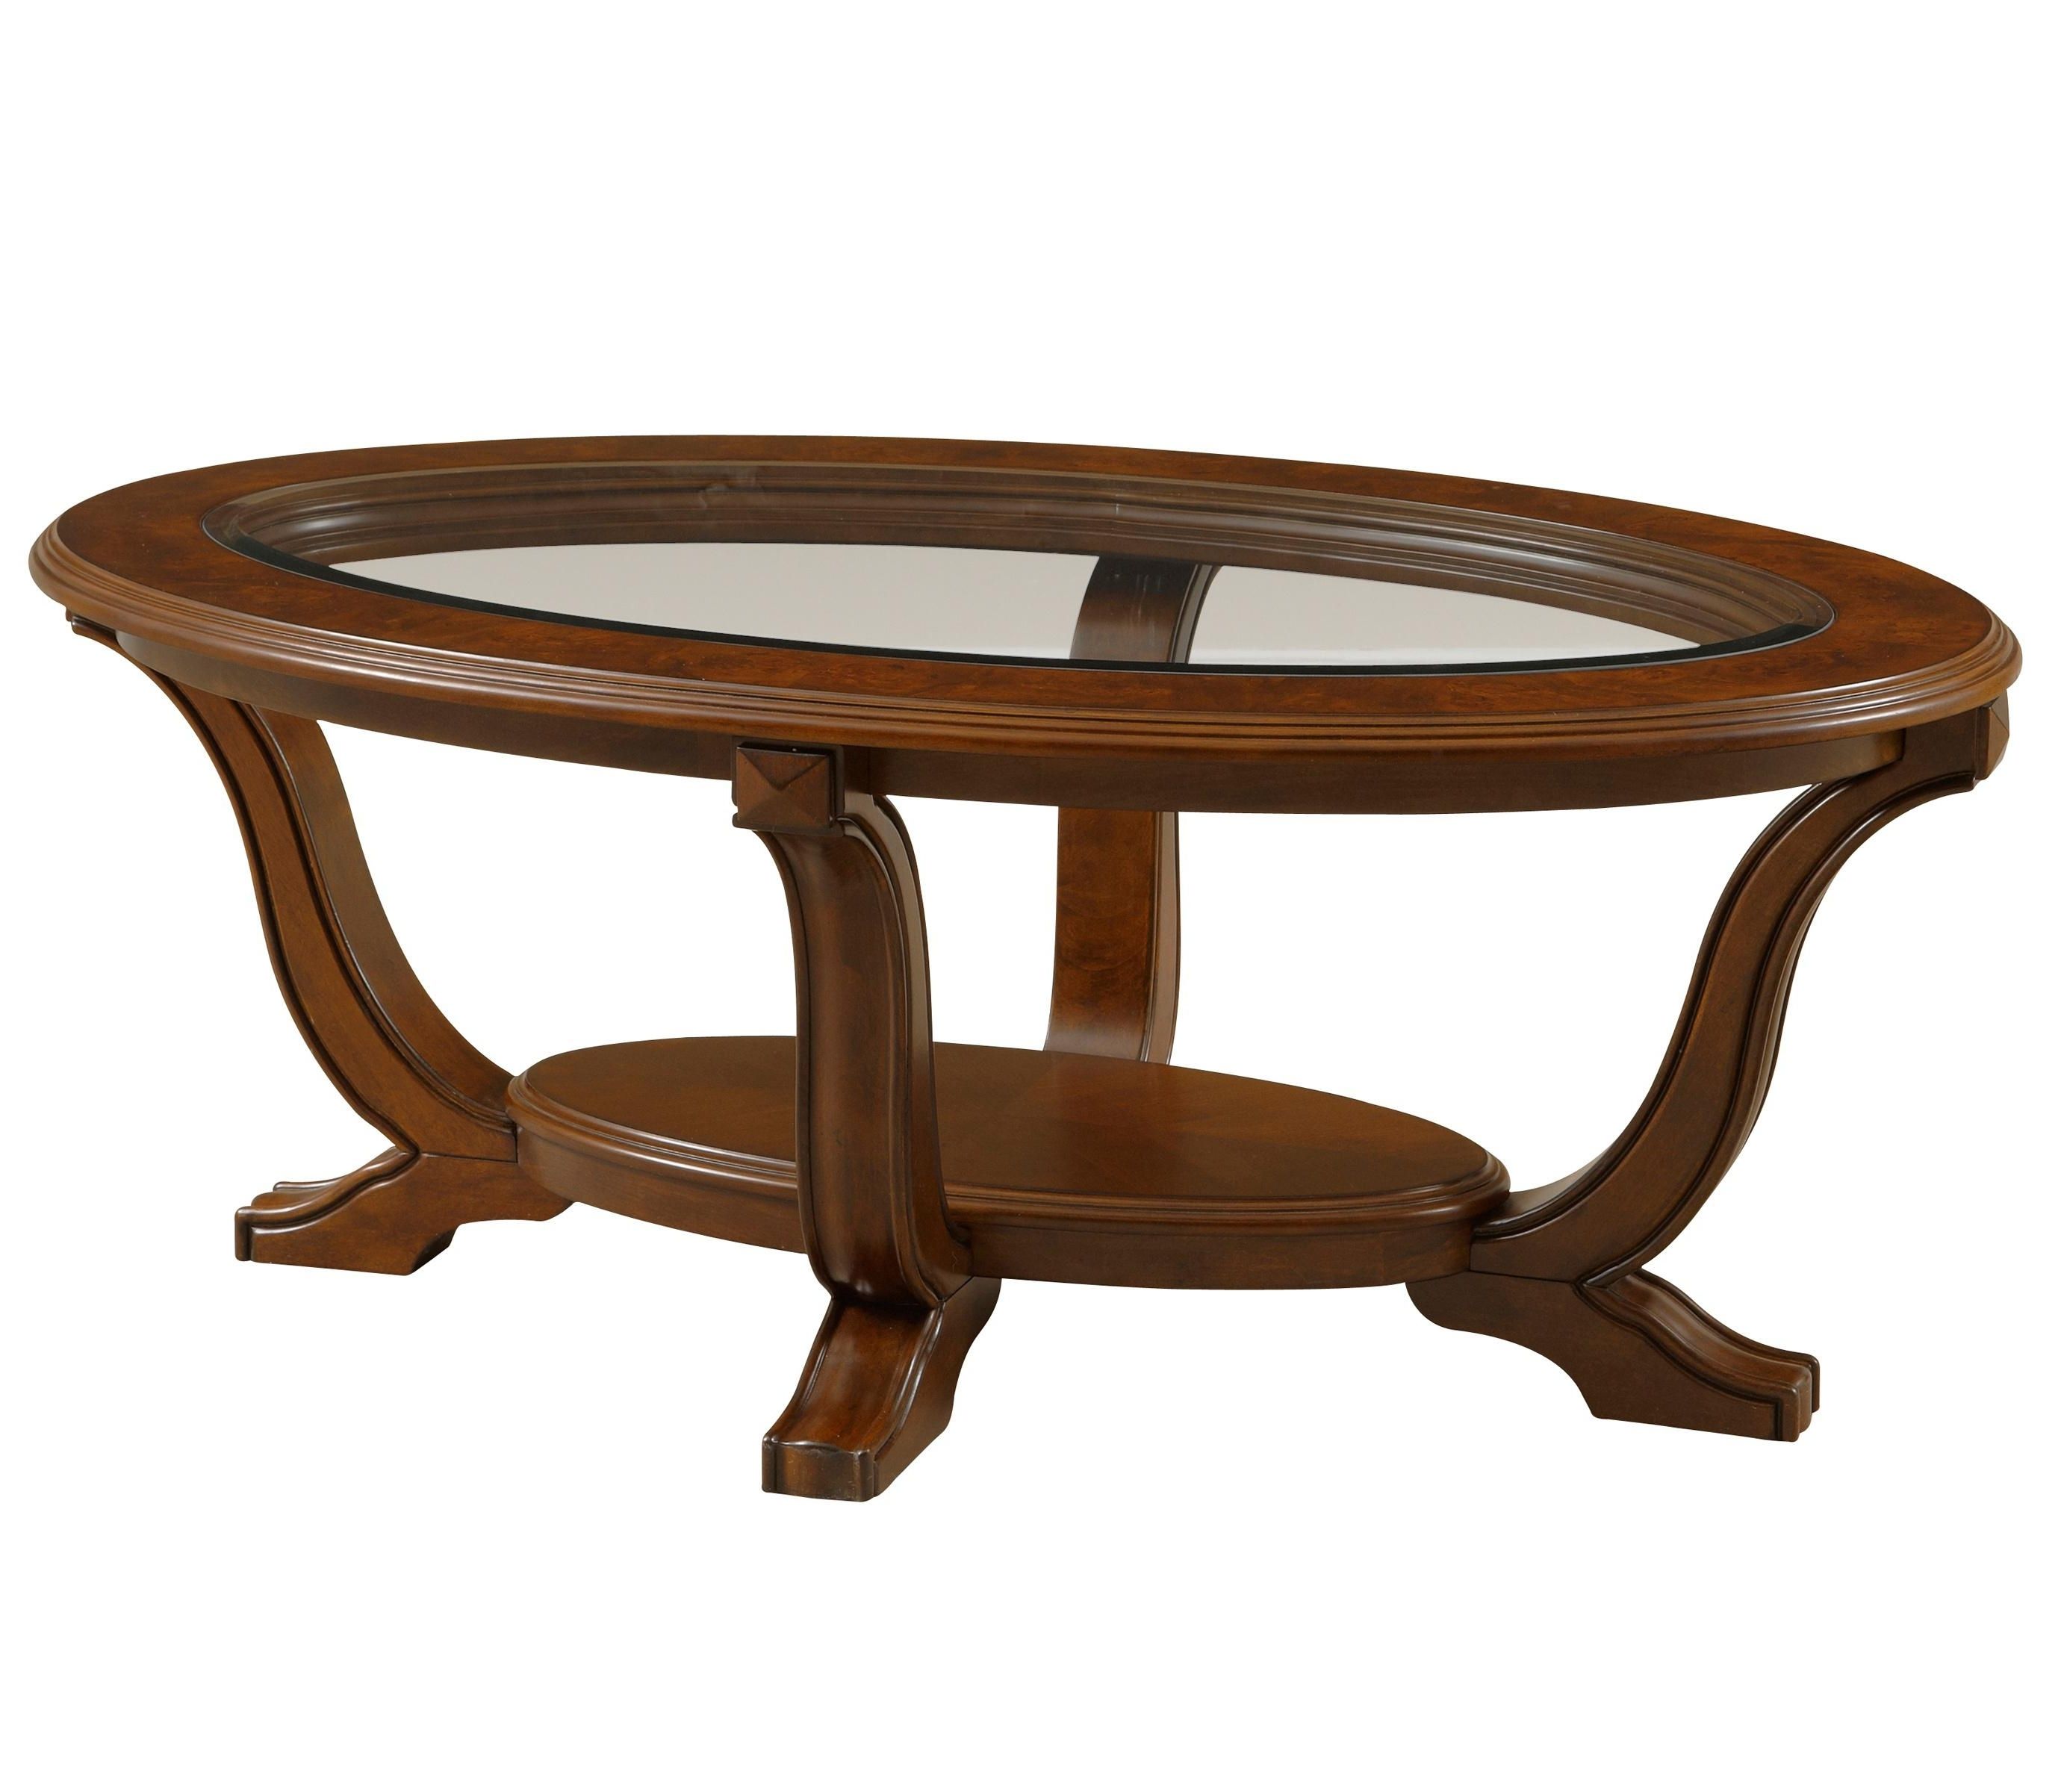 Preferred Exton Cocktail Tables In Broyhill Furniture Lana Oval Cocktail Table With Glass Top Insert (View 4 of 20)